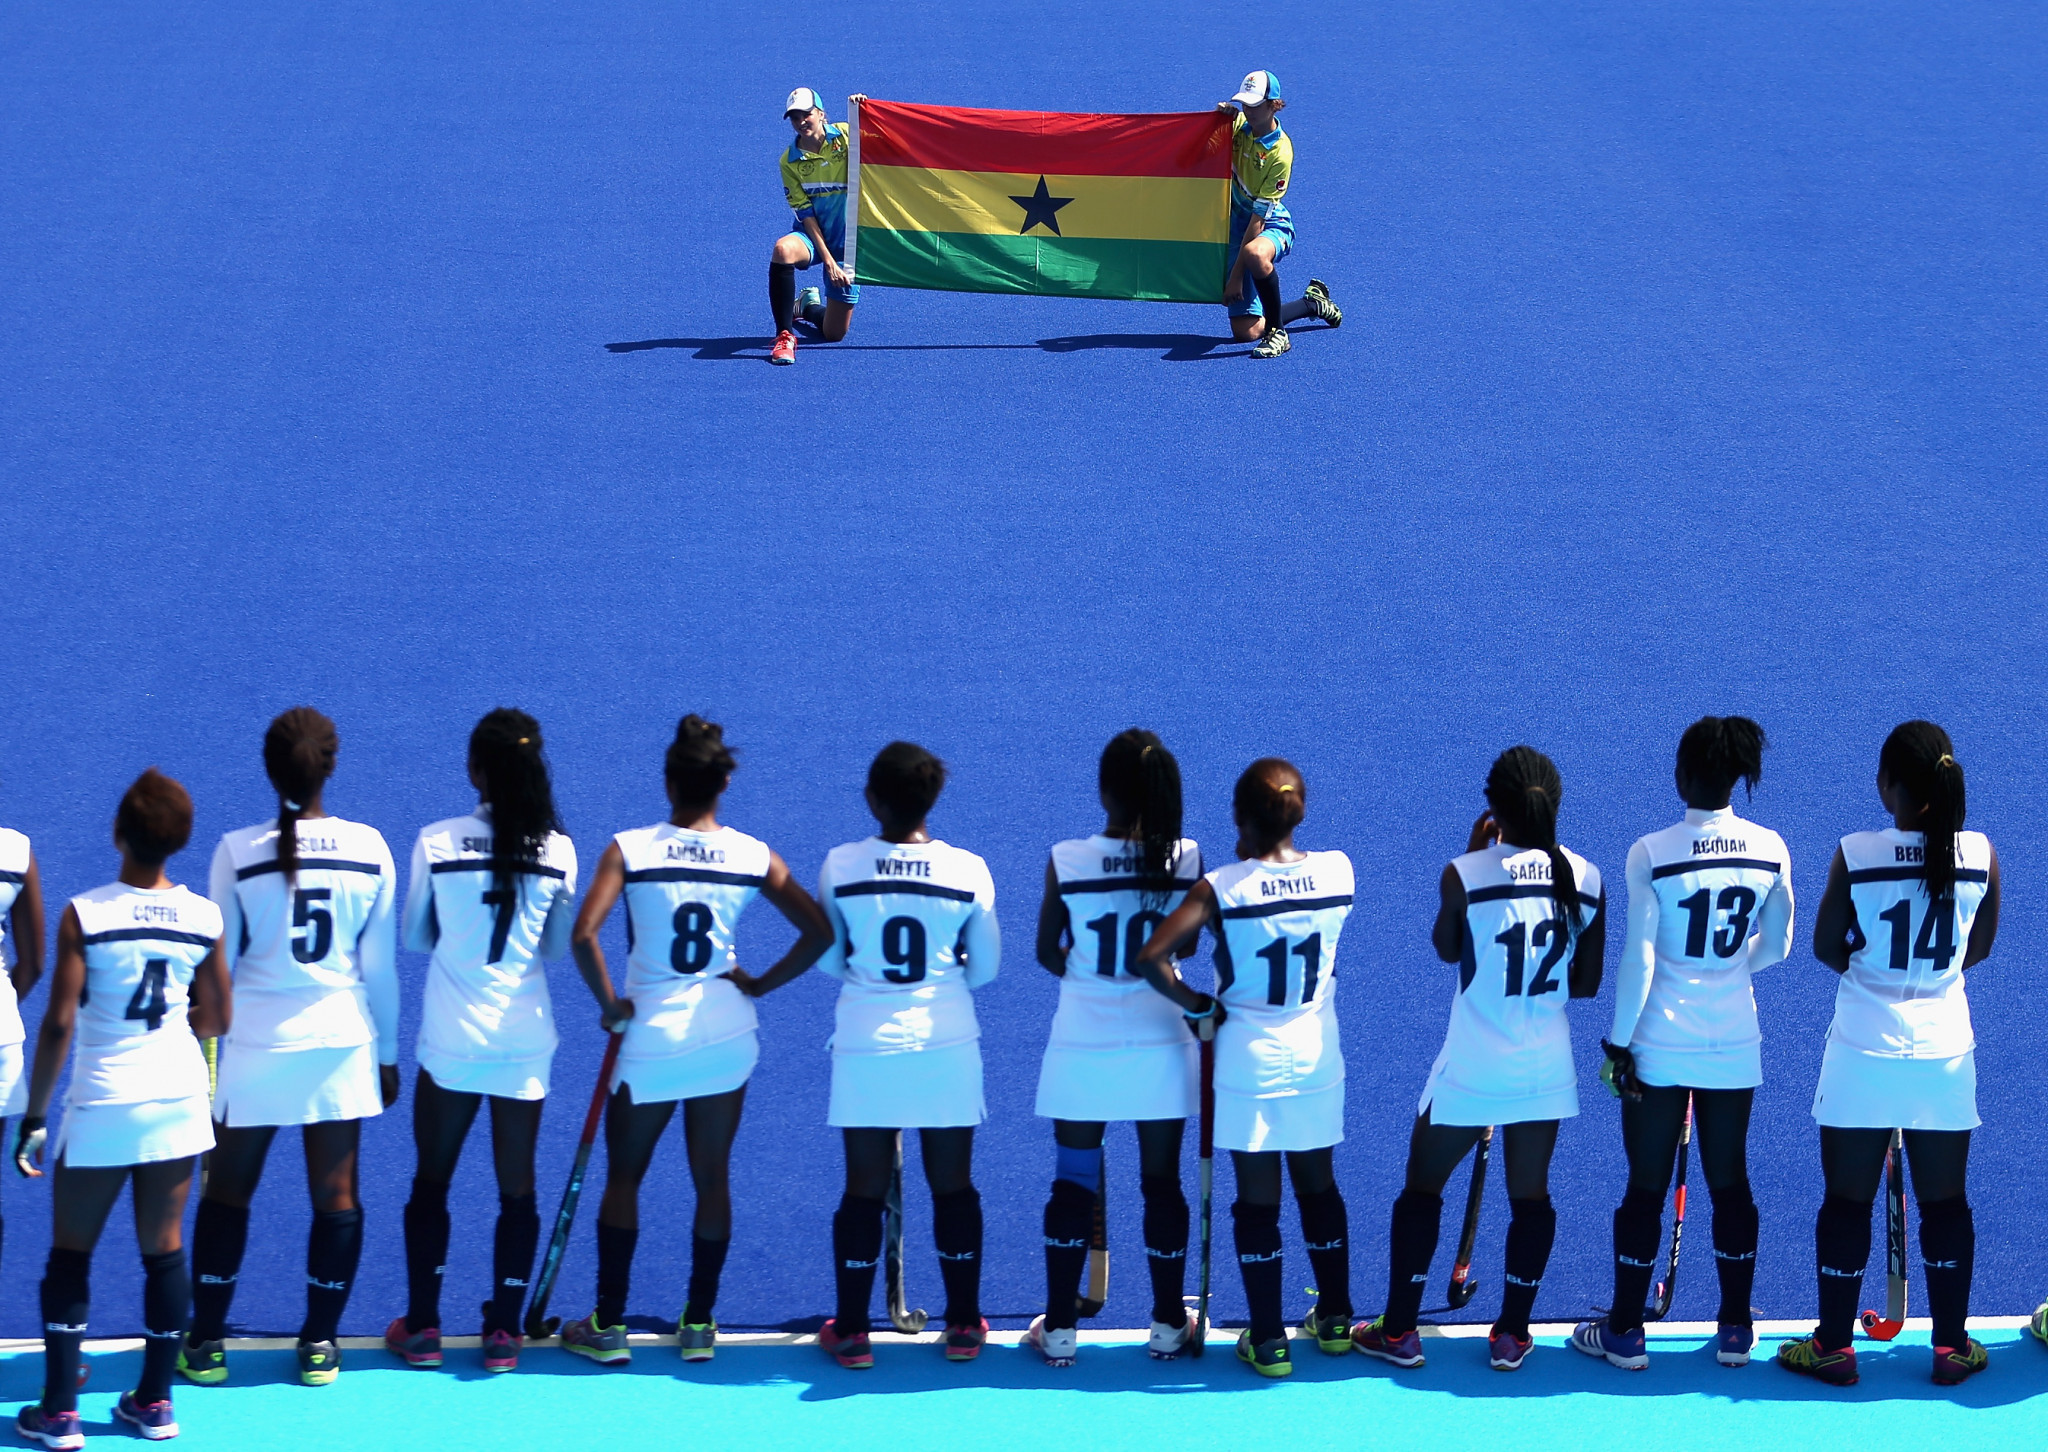 Sports Minister says bigger Ghana team at Birmingham 2022 shows investment paying off